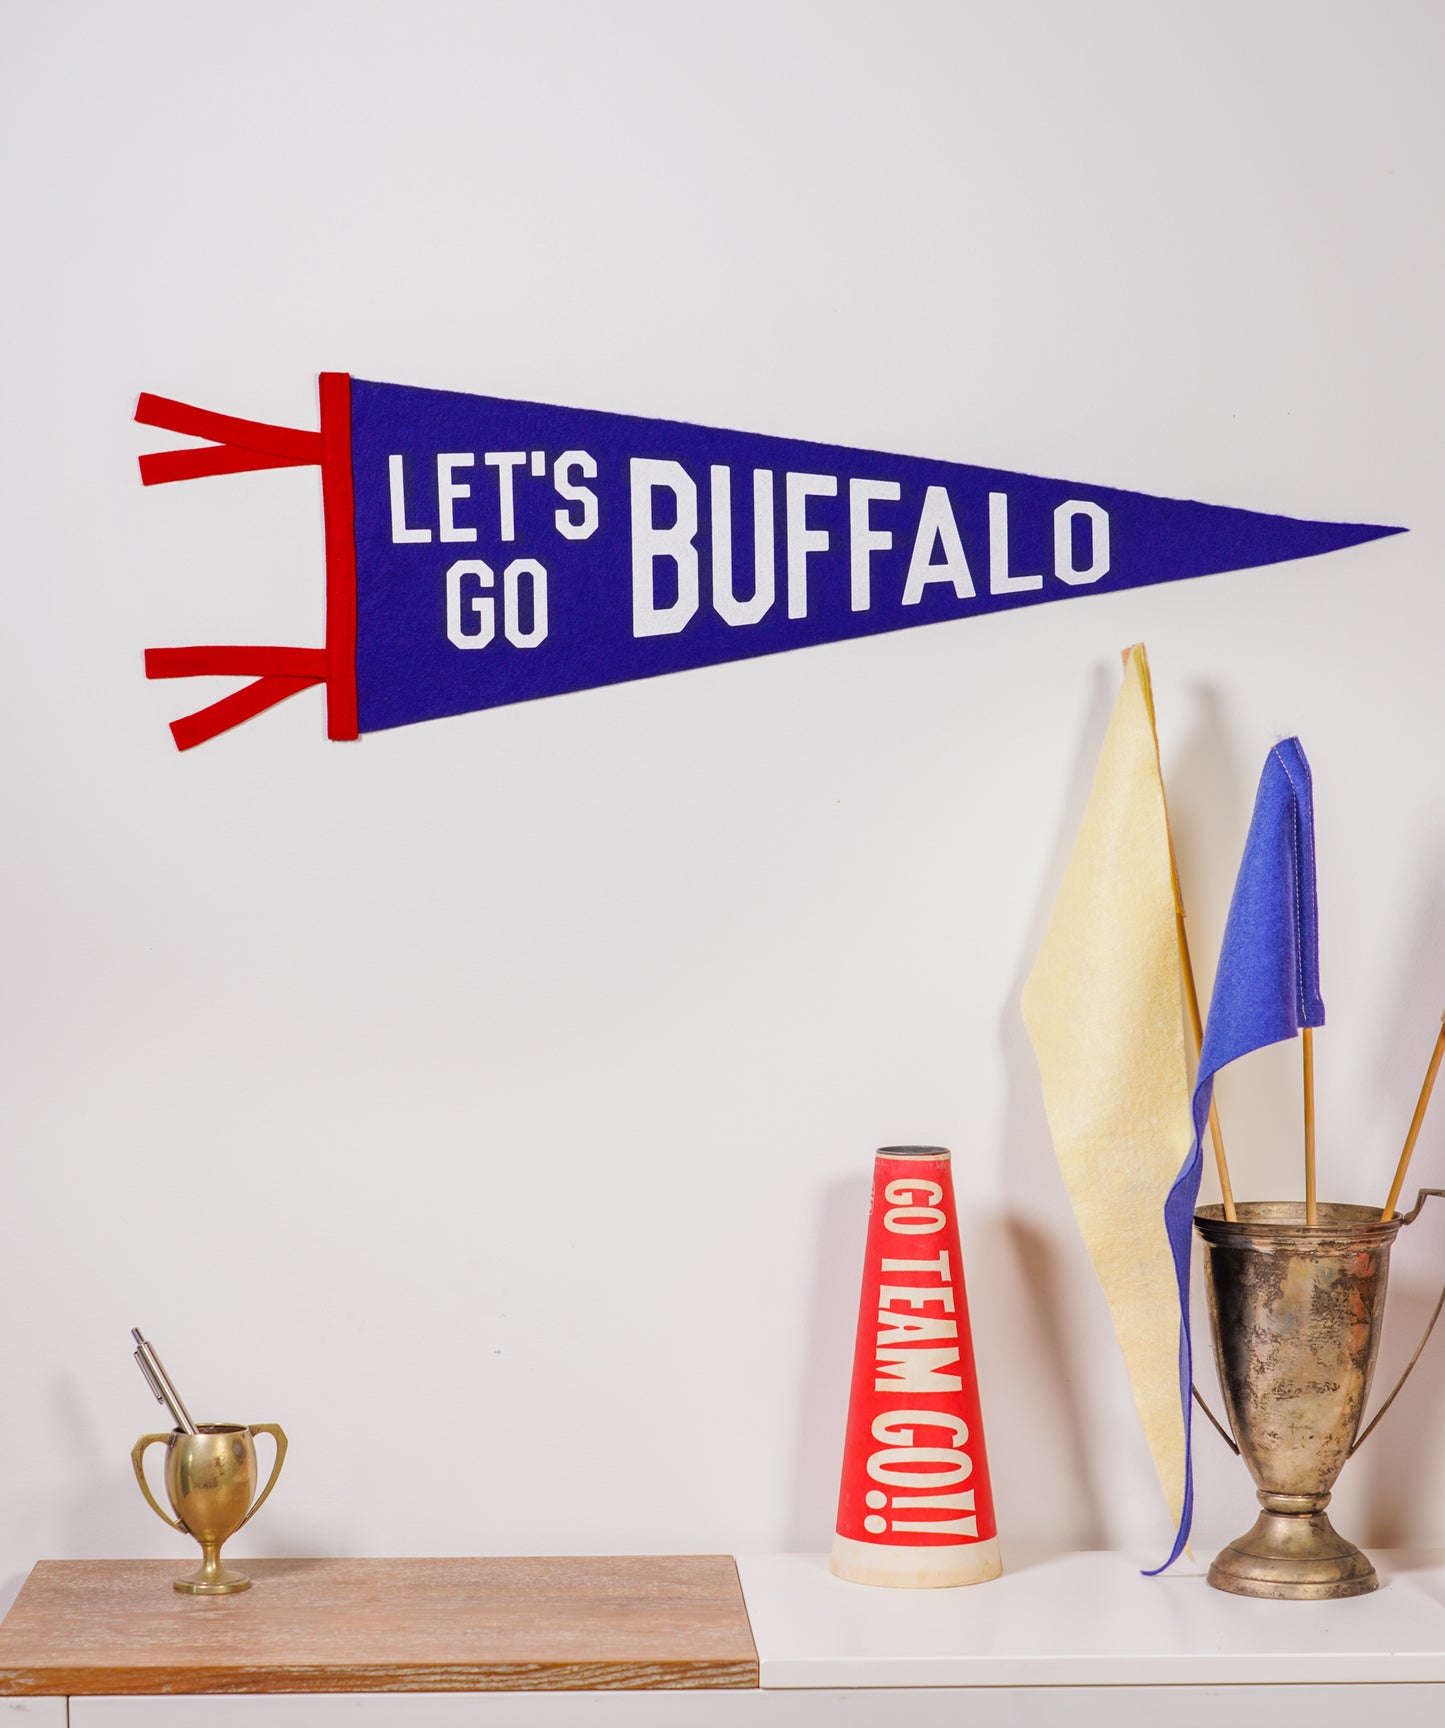 Let's Go Buffalo Pennant (Blue and Red)